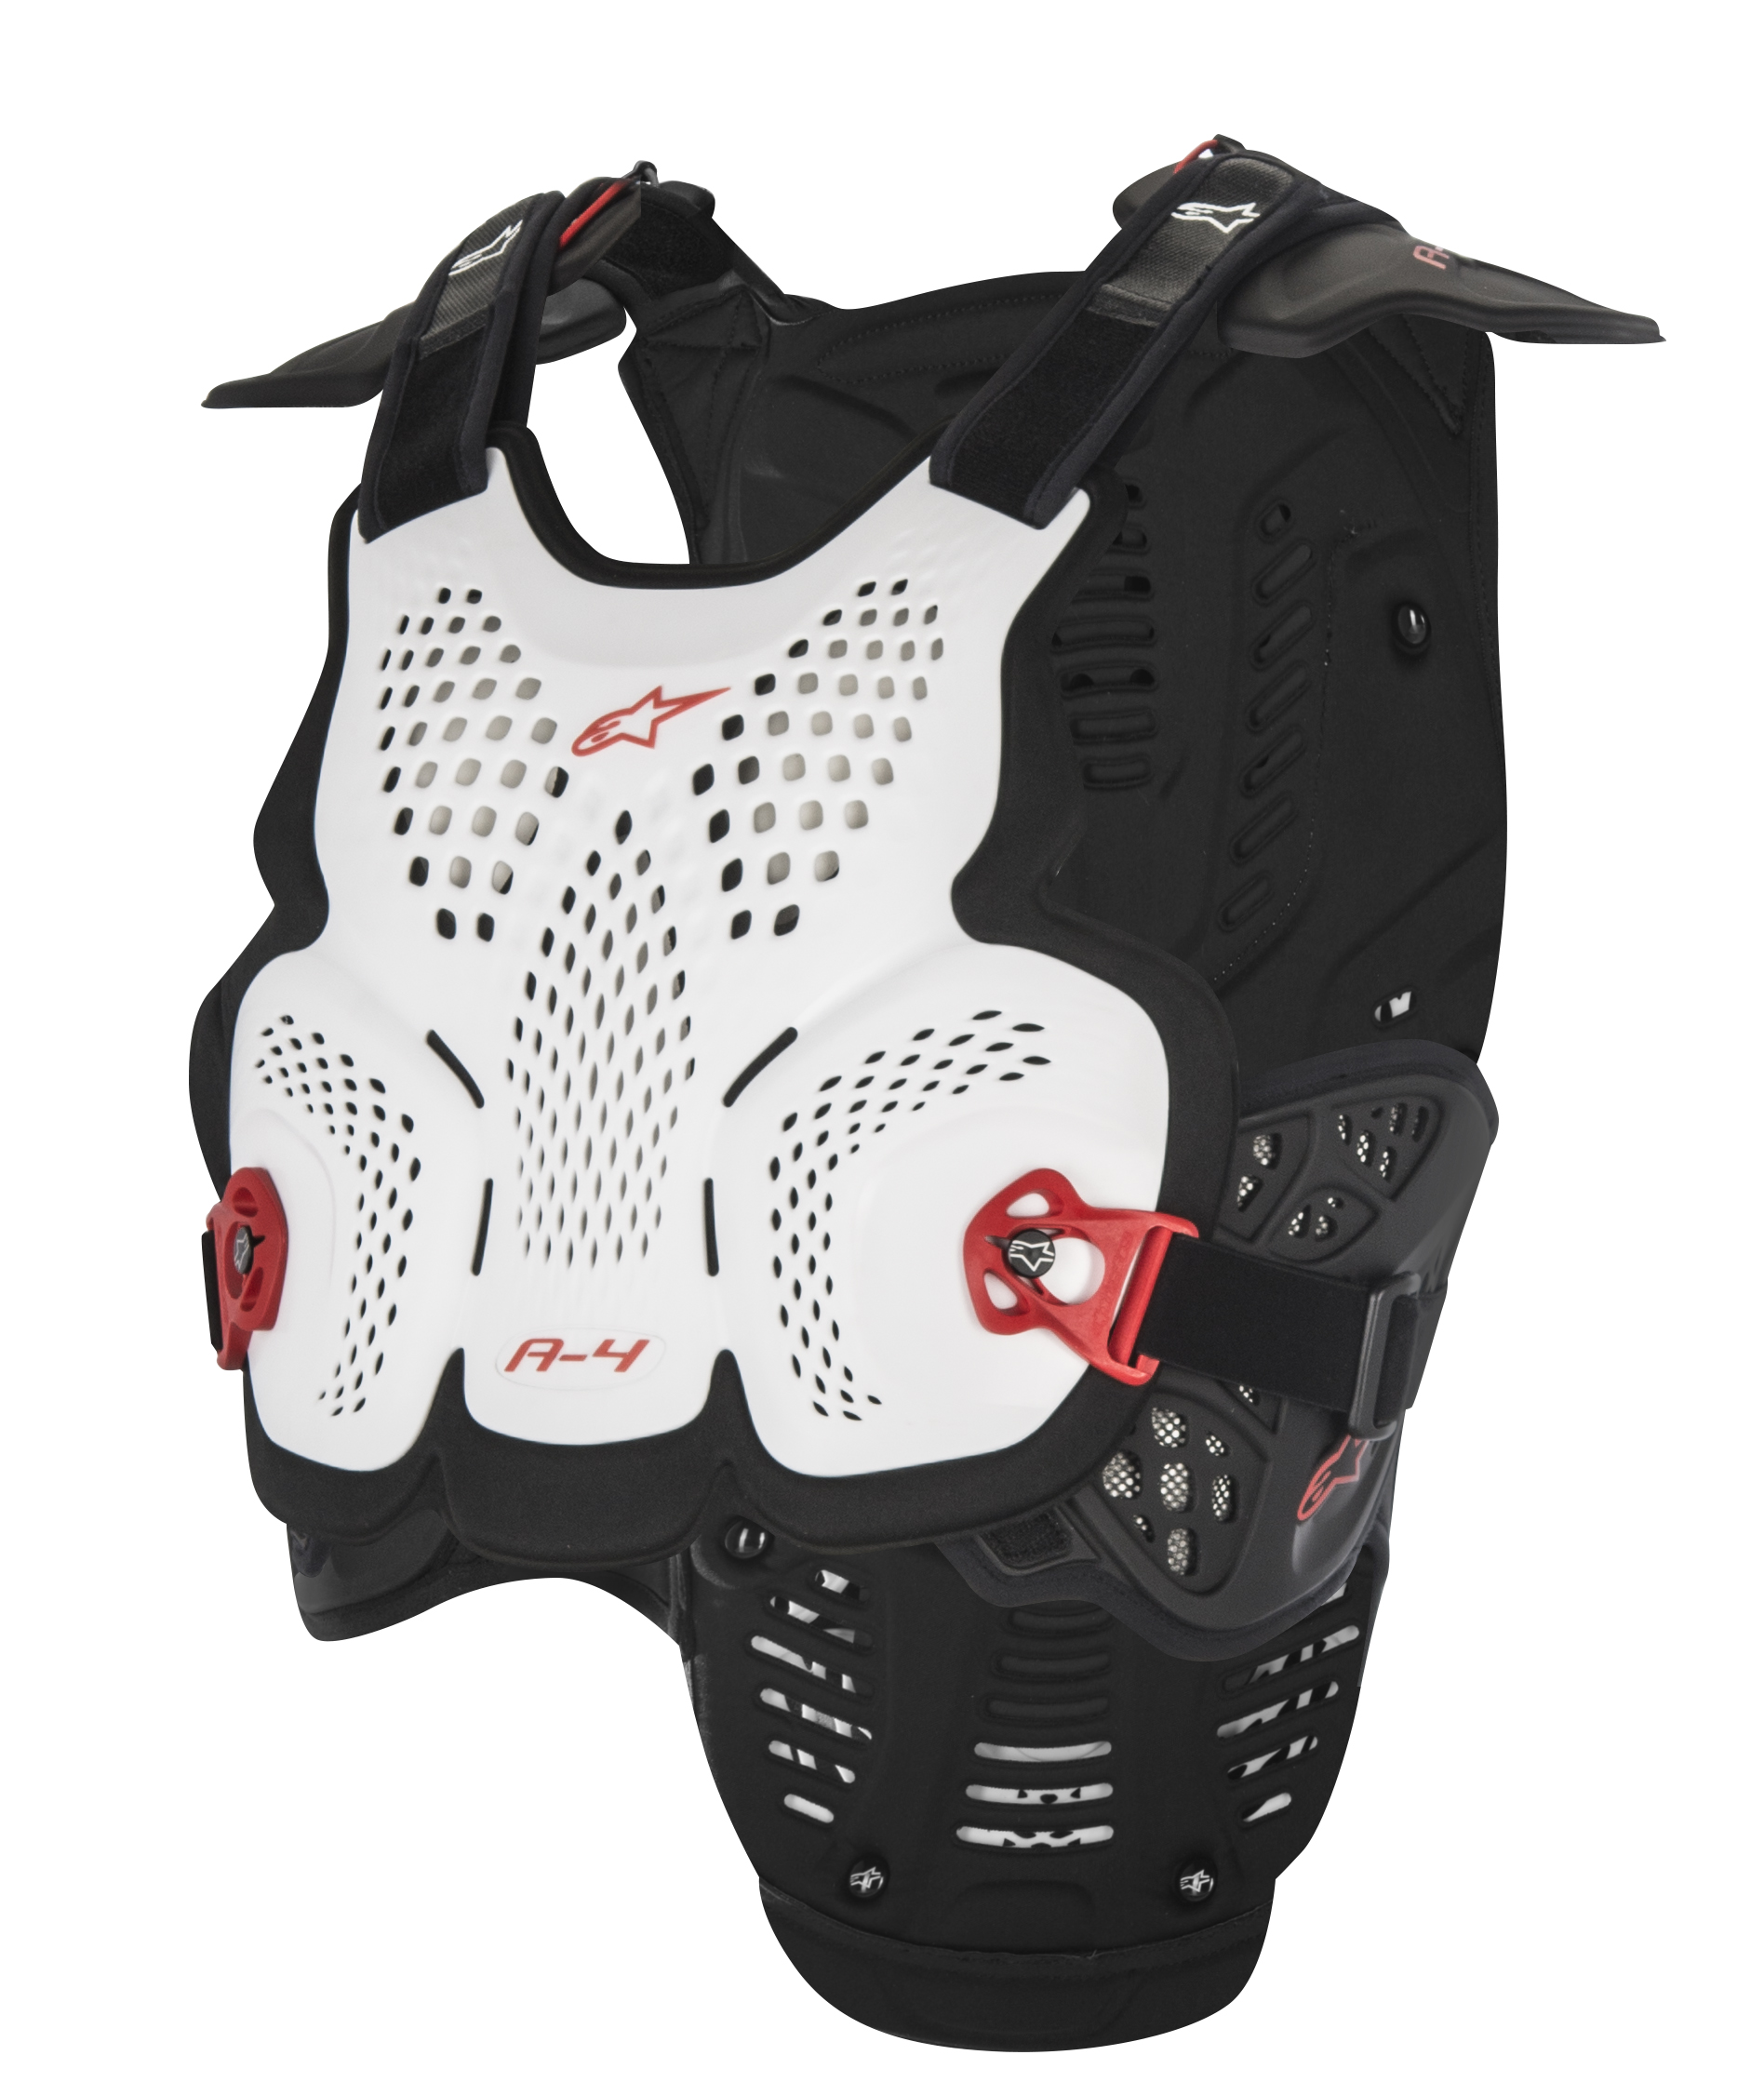 ALPINESTARS A-4 MAX CHEST PROTECTOR BLK/ANTH/FLUO YLW XL/2X #482-62122